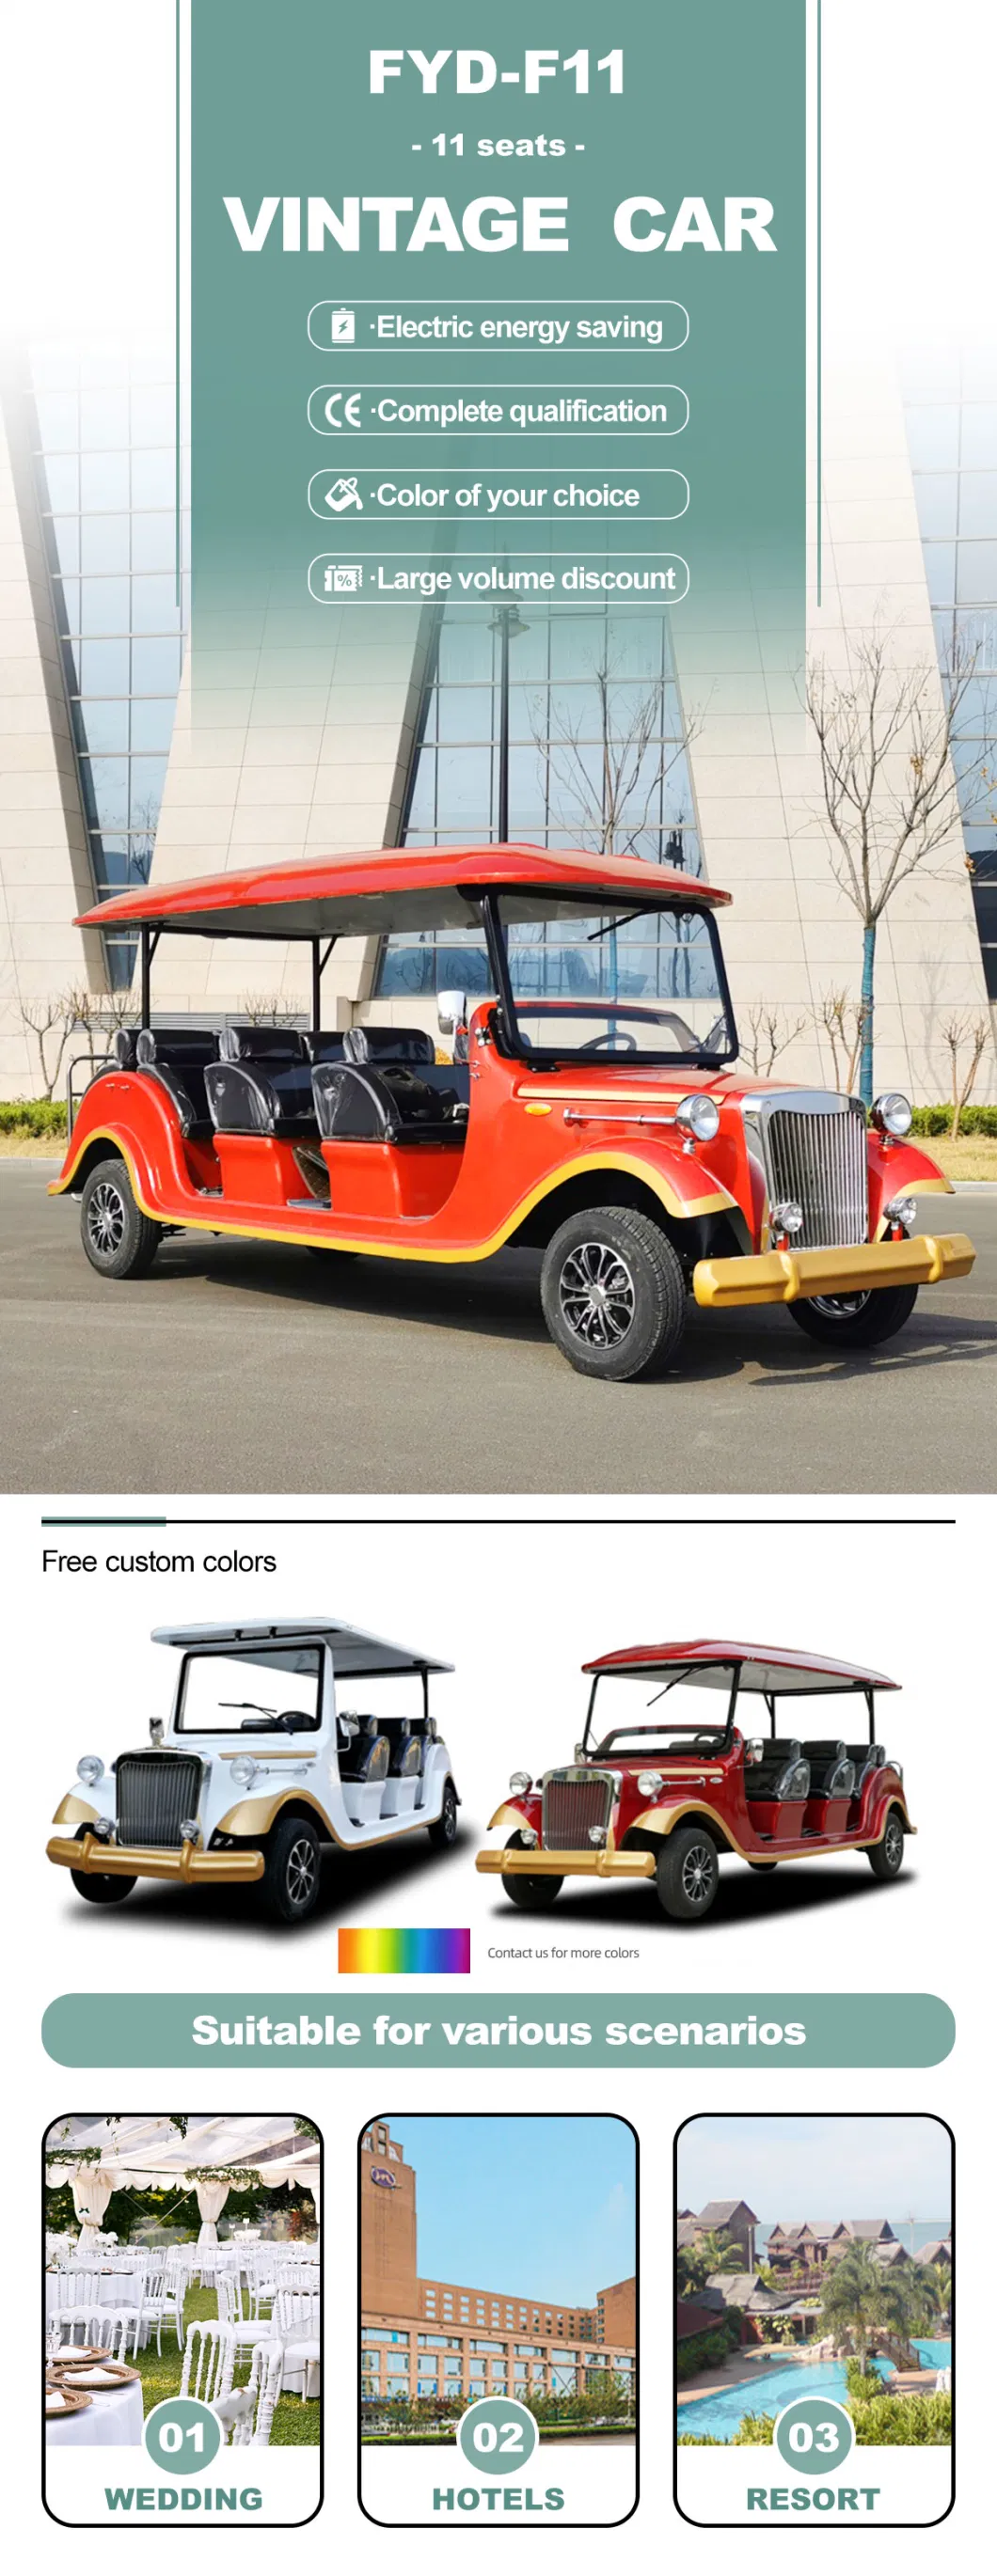 Cheap Price European Standard High Quality Aluminum Material Vintage Electric Car for 11 Passengers